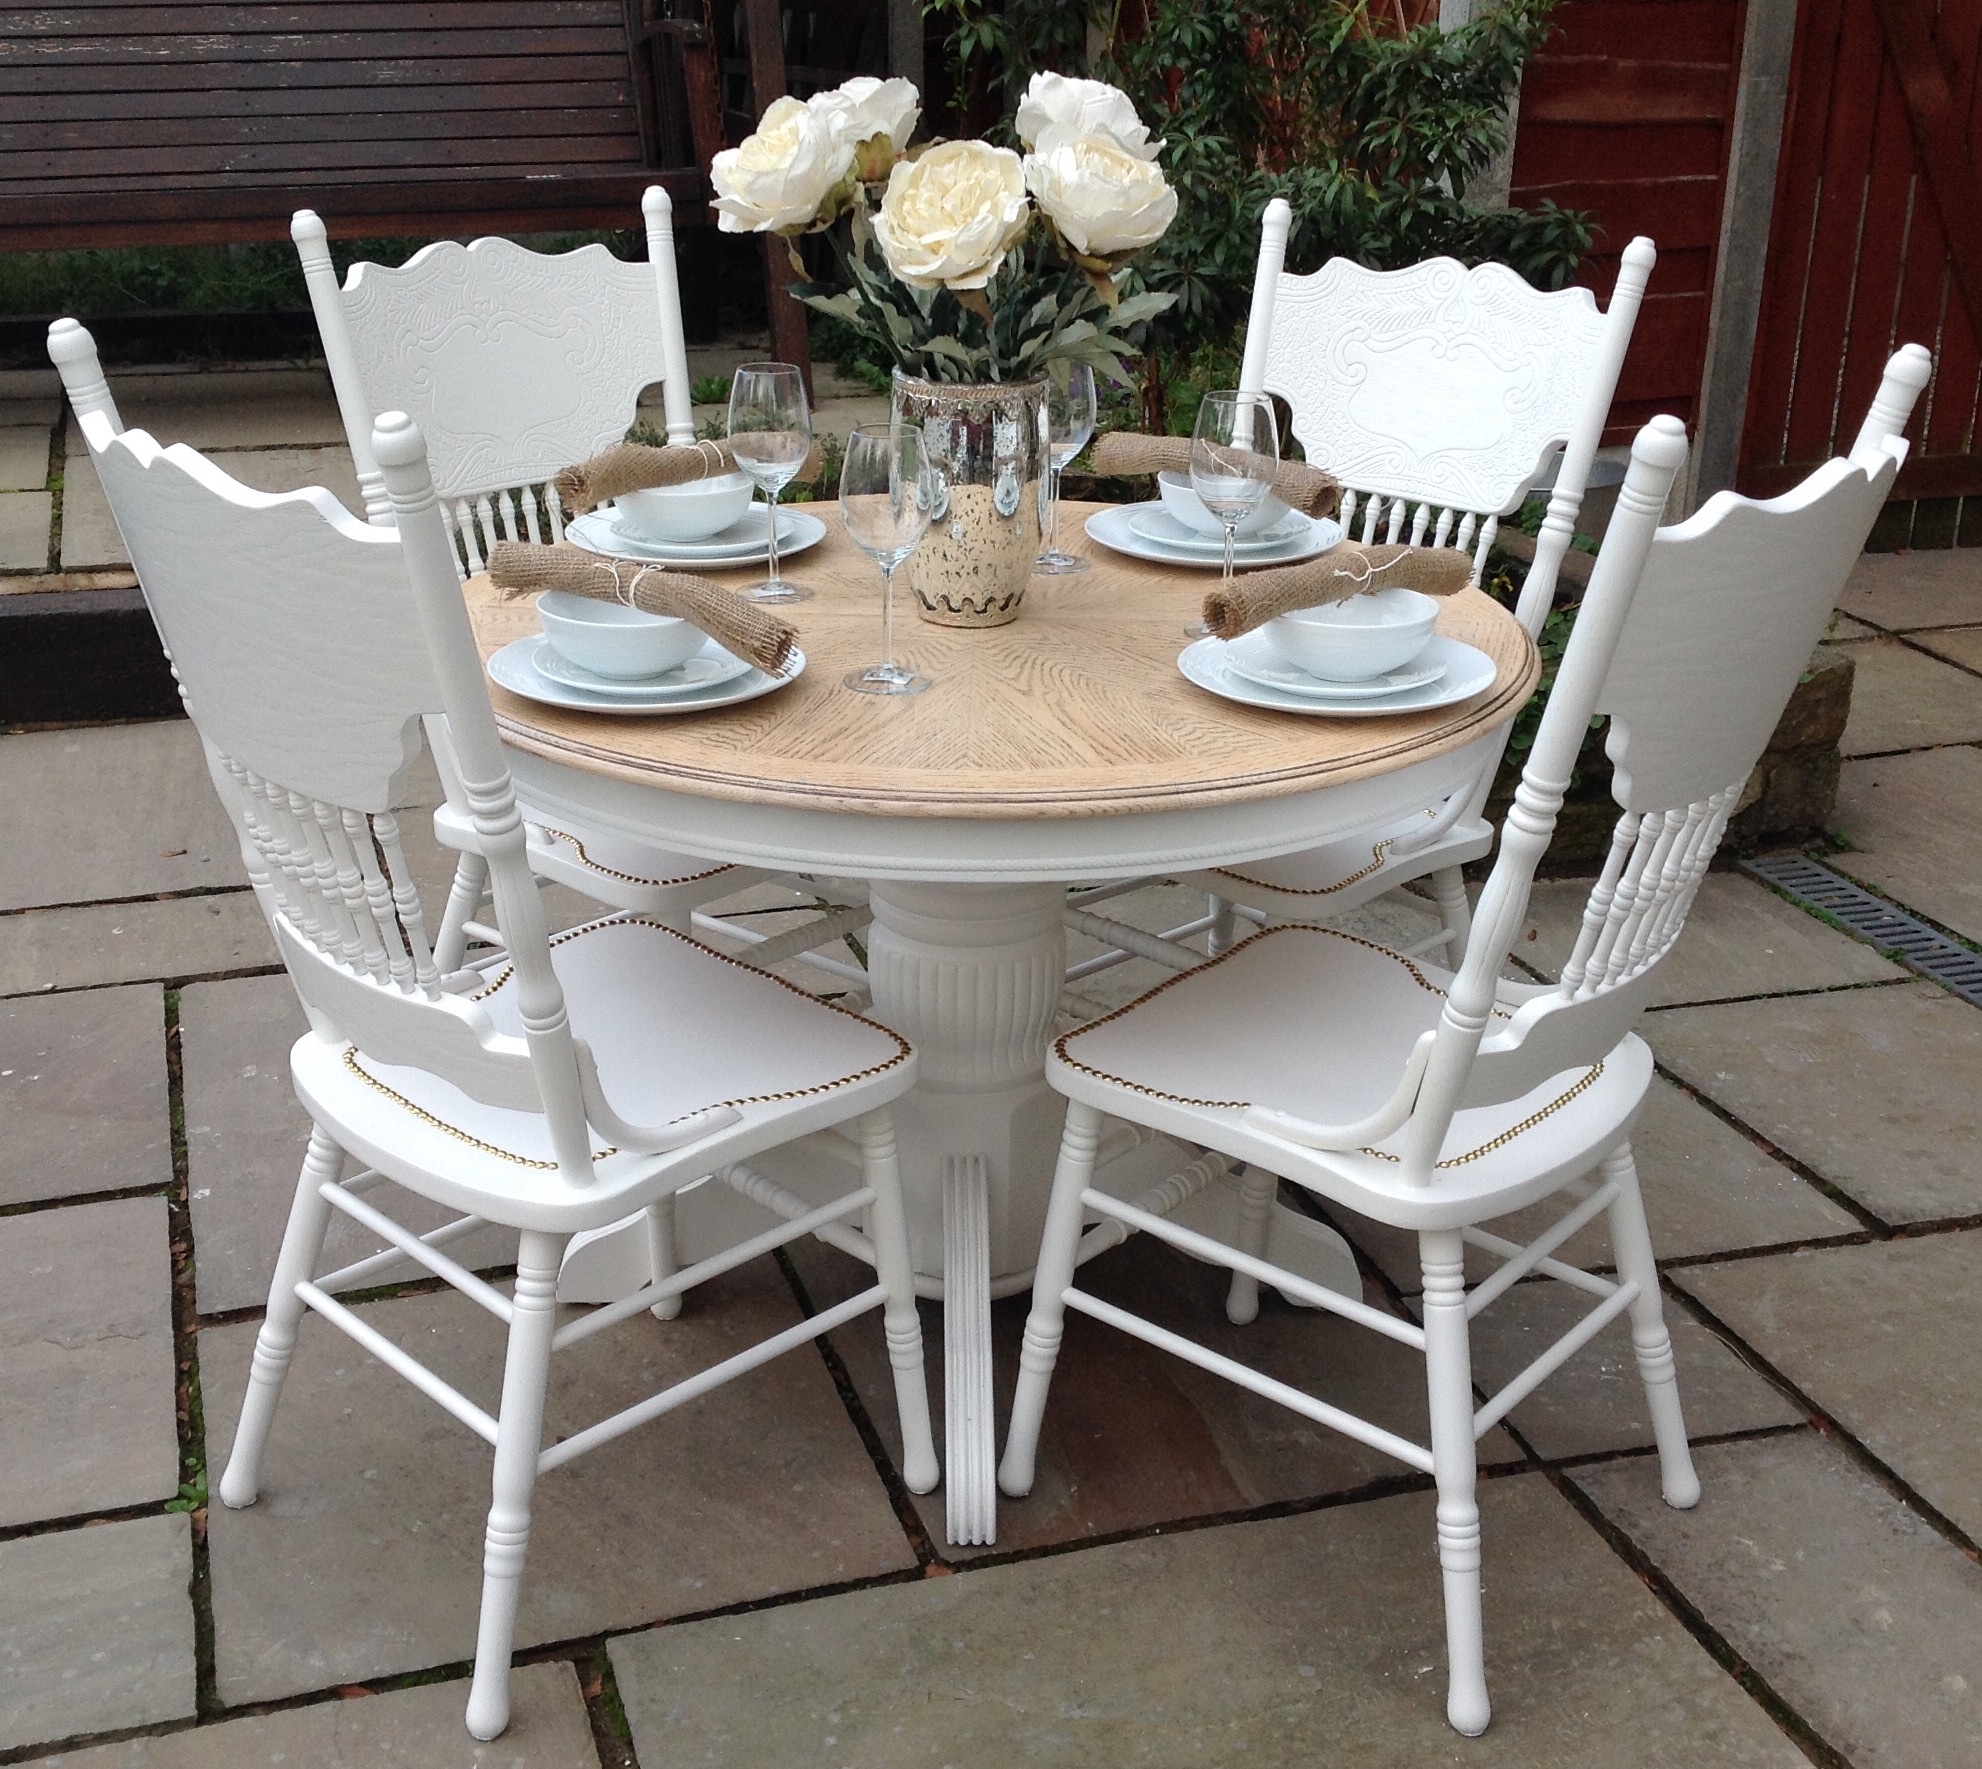 Shabby Chic Dining Table Visualhunt, Shabby Chic Round Kitchen Table And Chairs Set